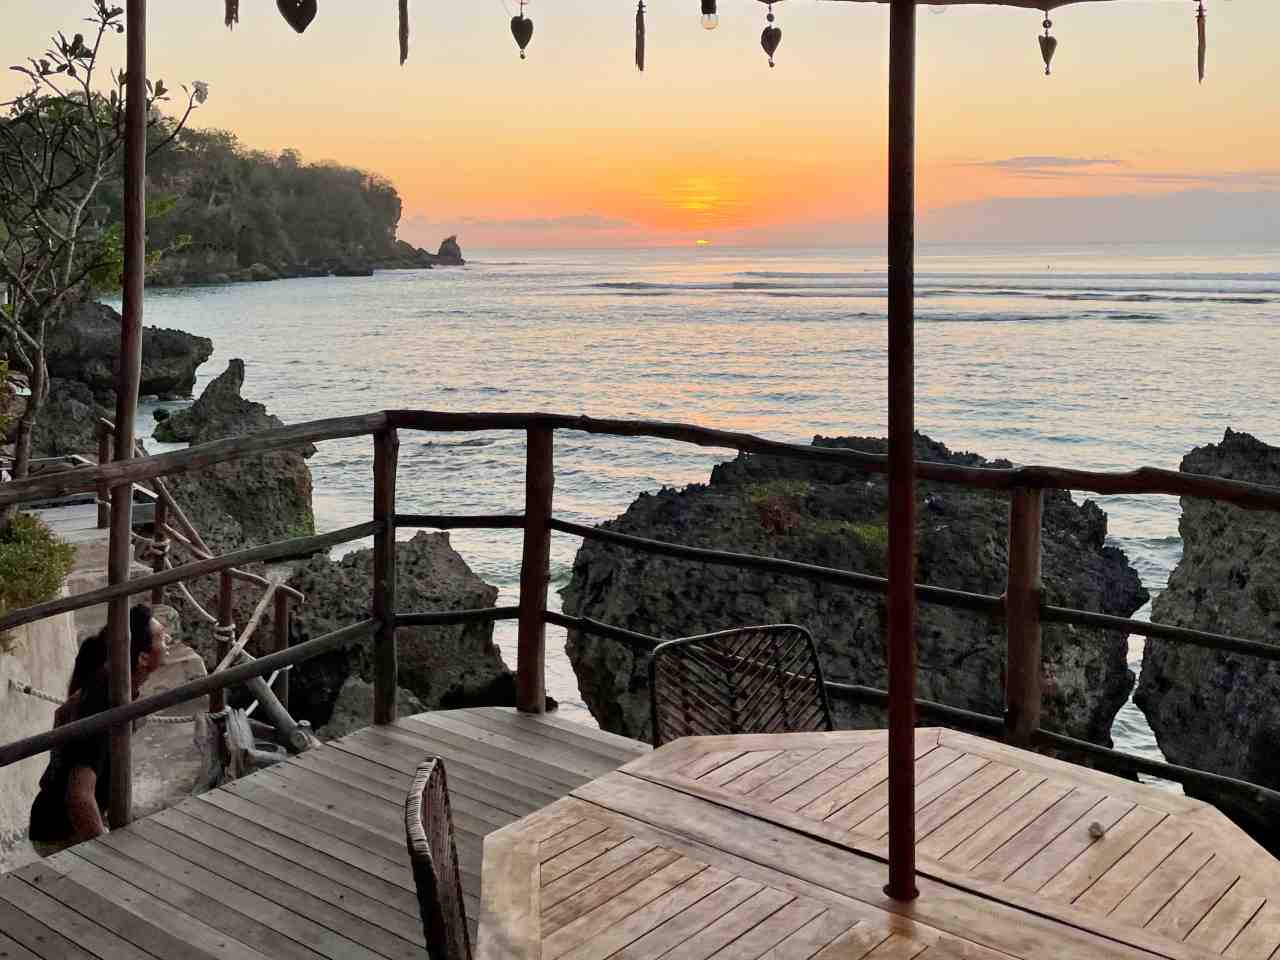 sunset from the cafe in a cliff